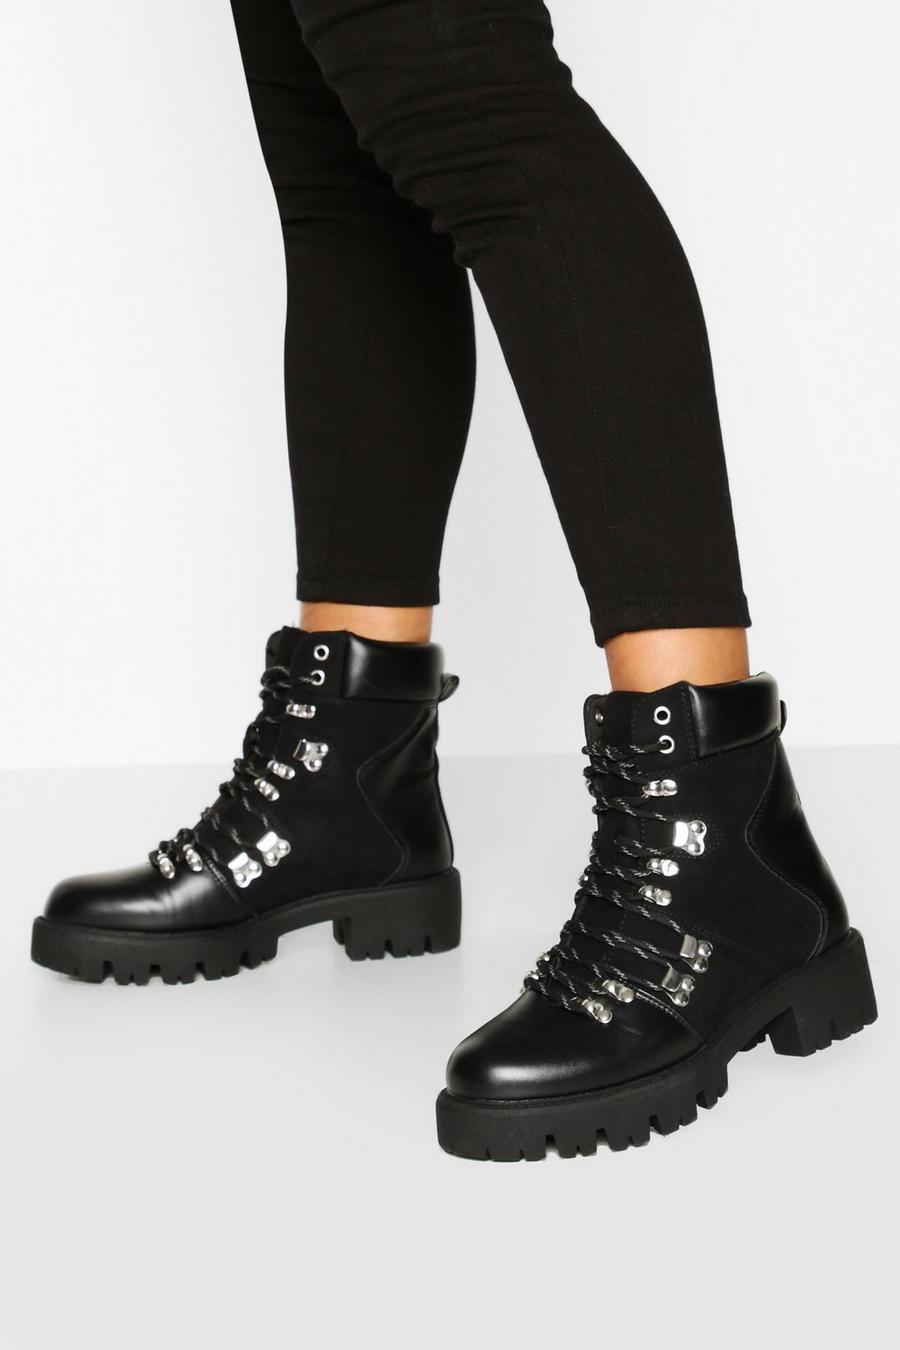 Black Lace Up Cleated Sole Hiker Boots image number 1